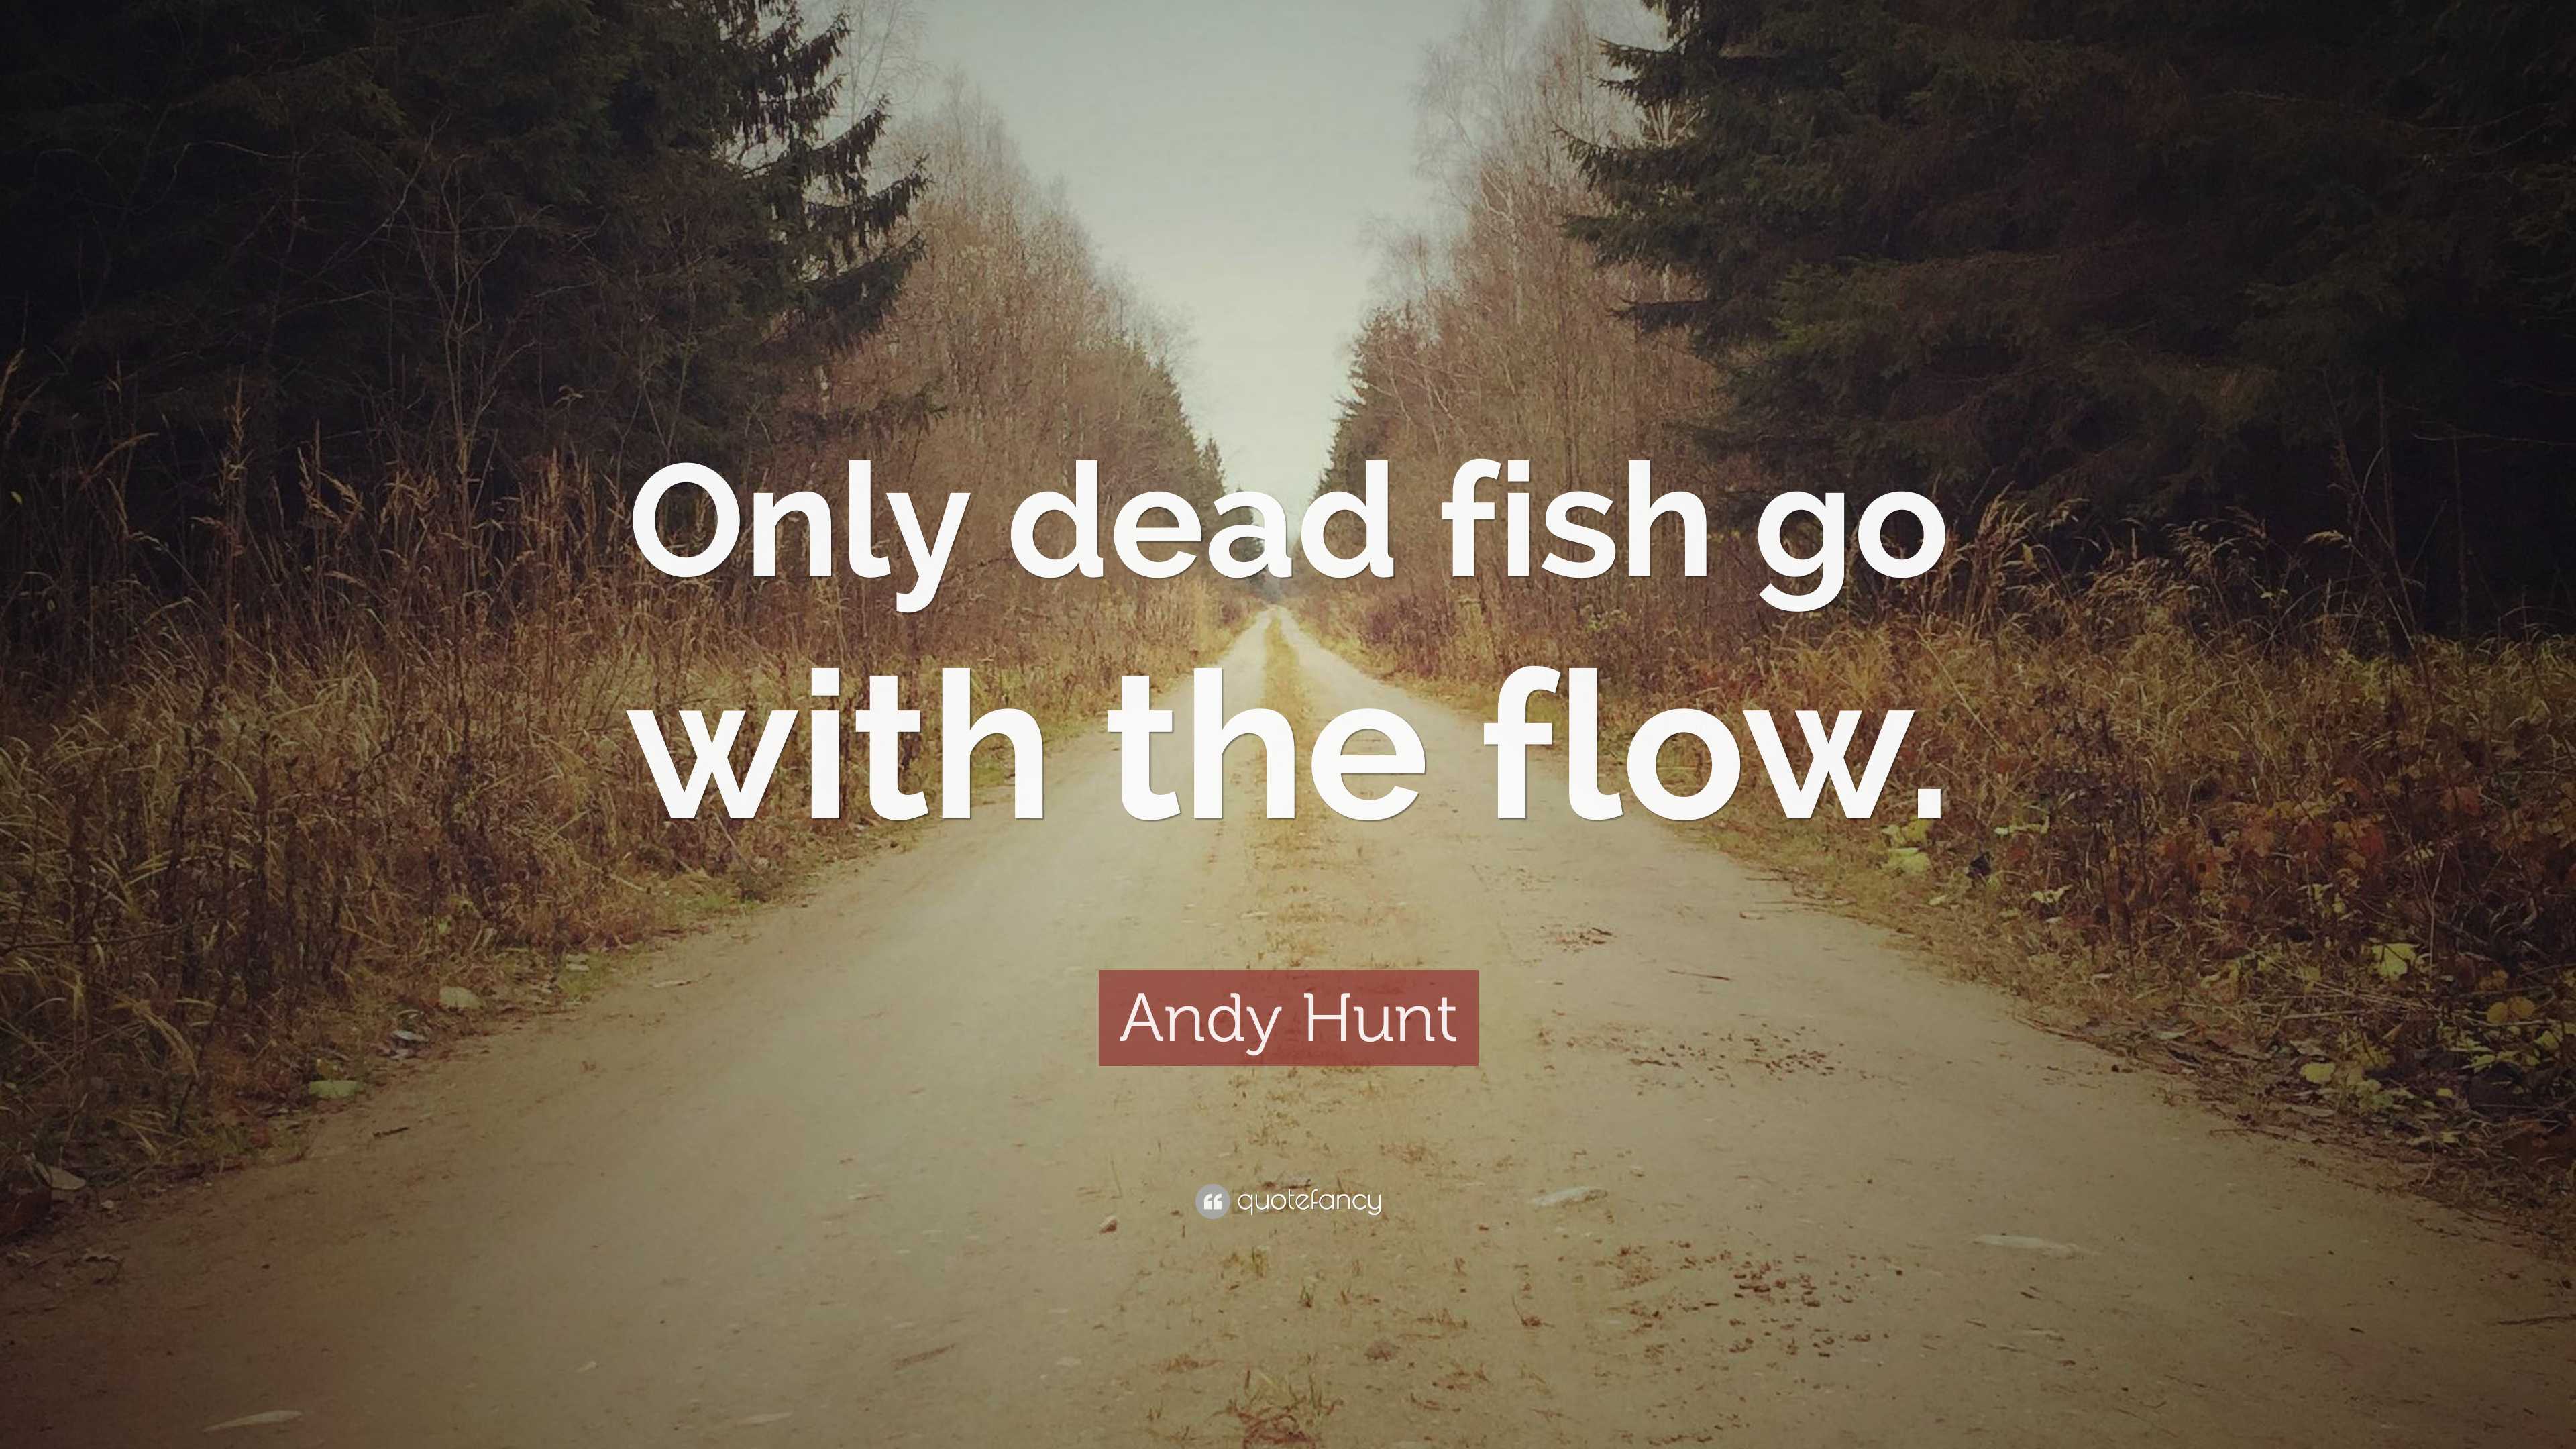 Andy Hunt Quote: “Only dead fish go with the flow.”